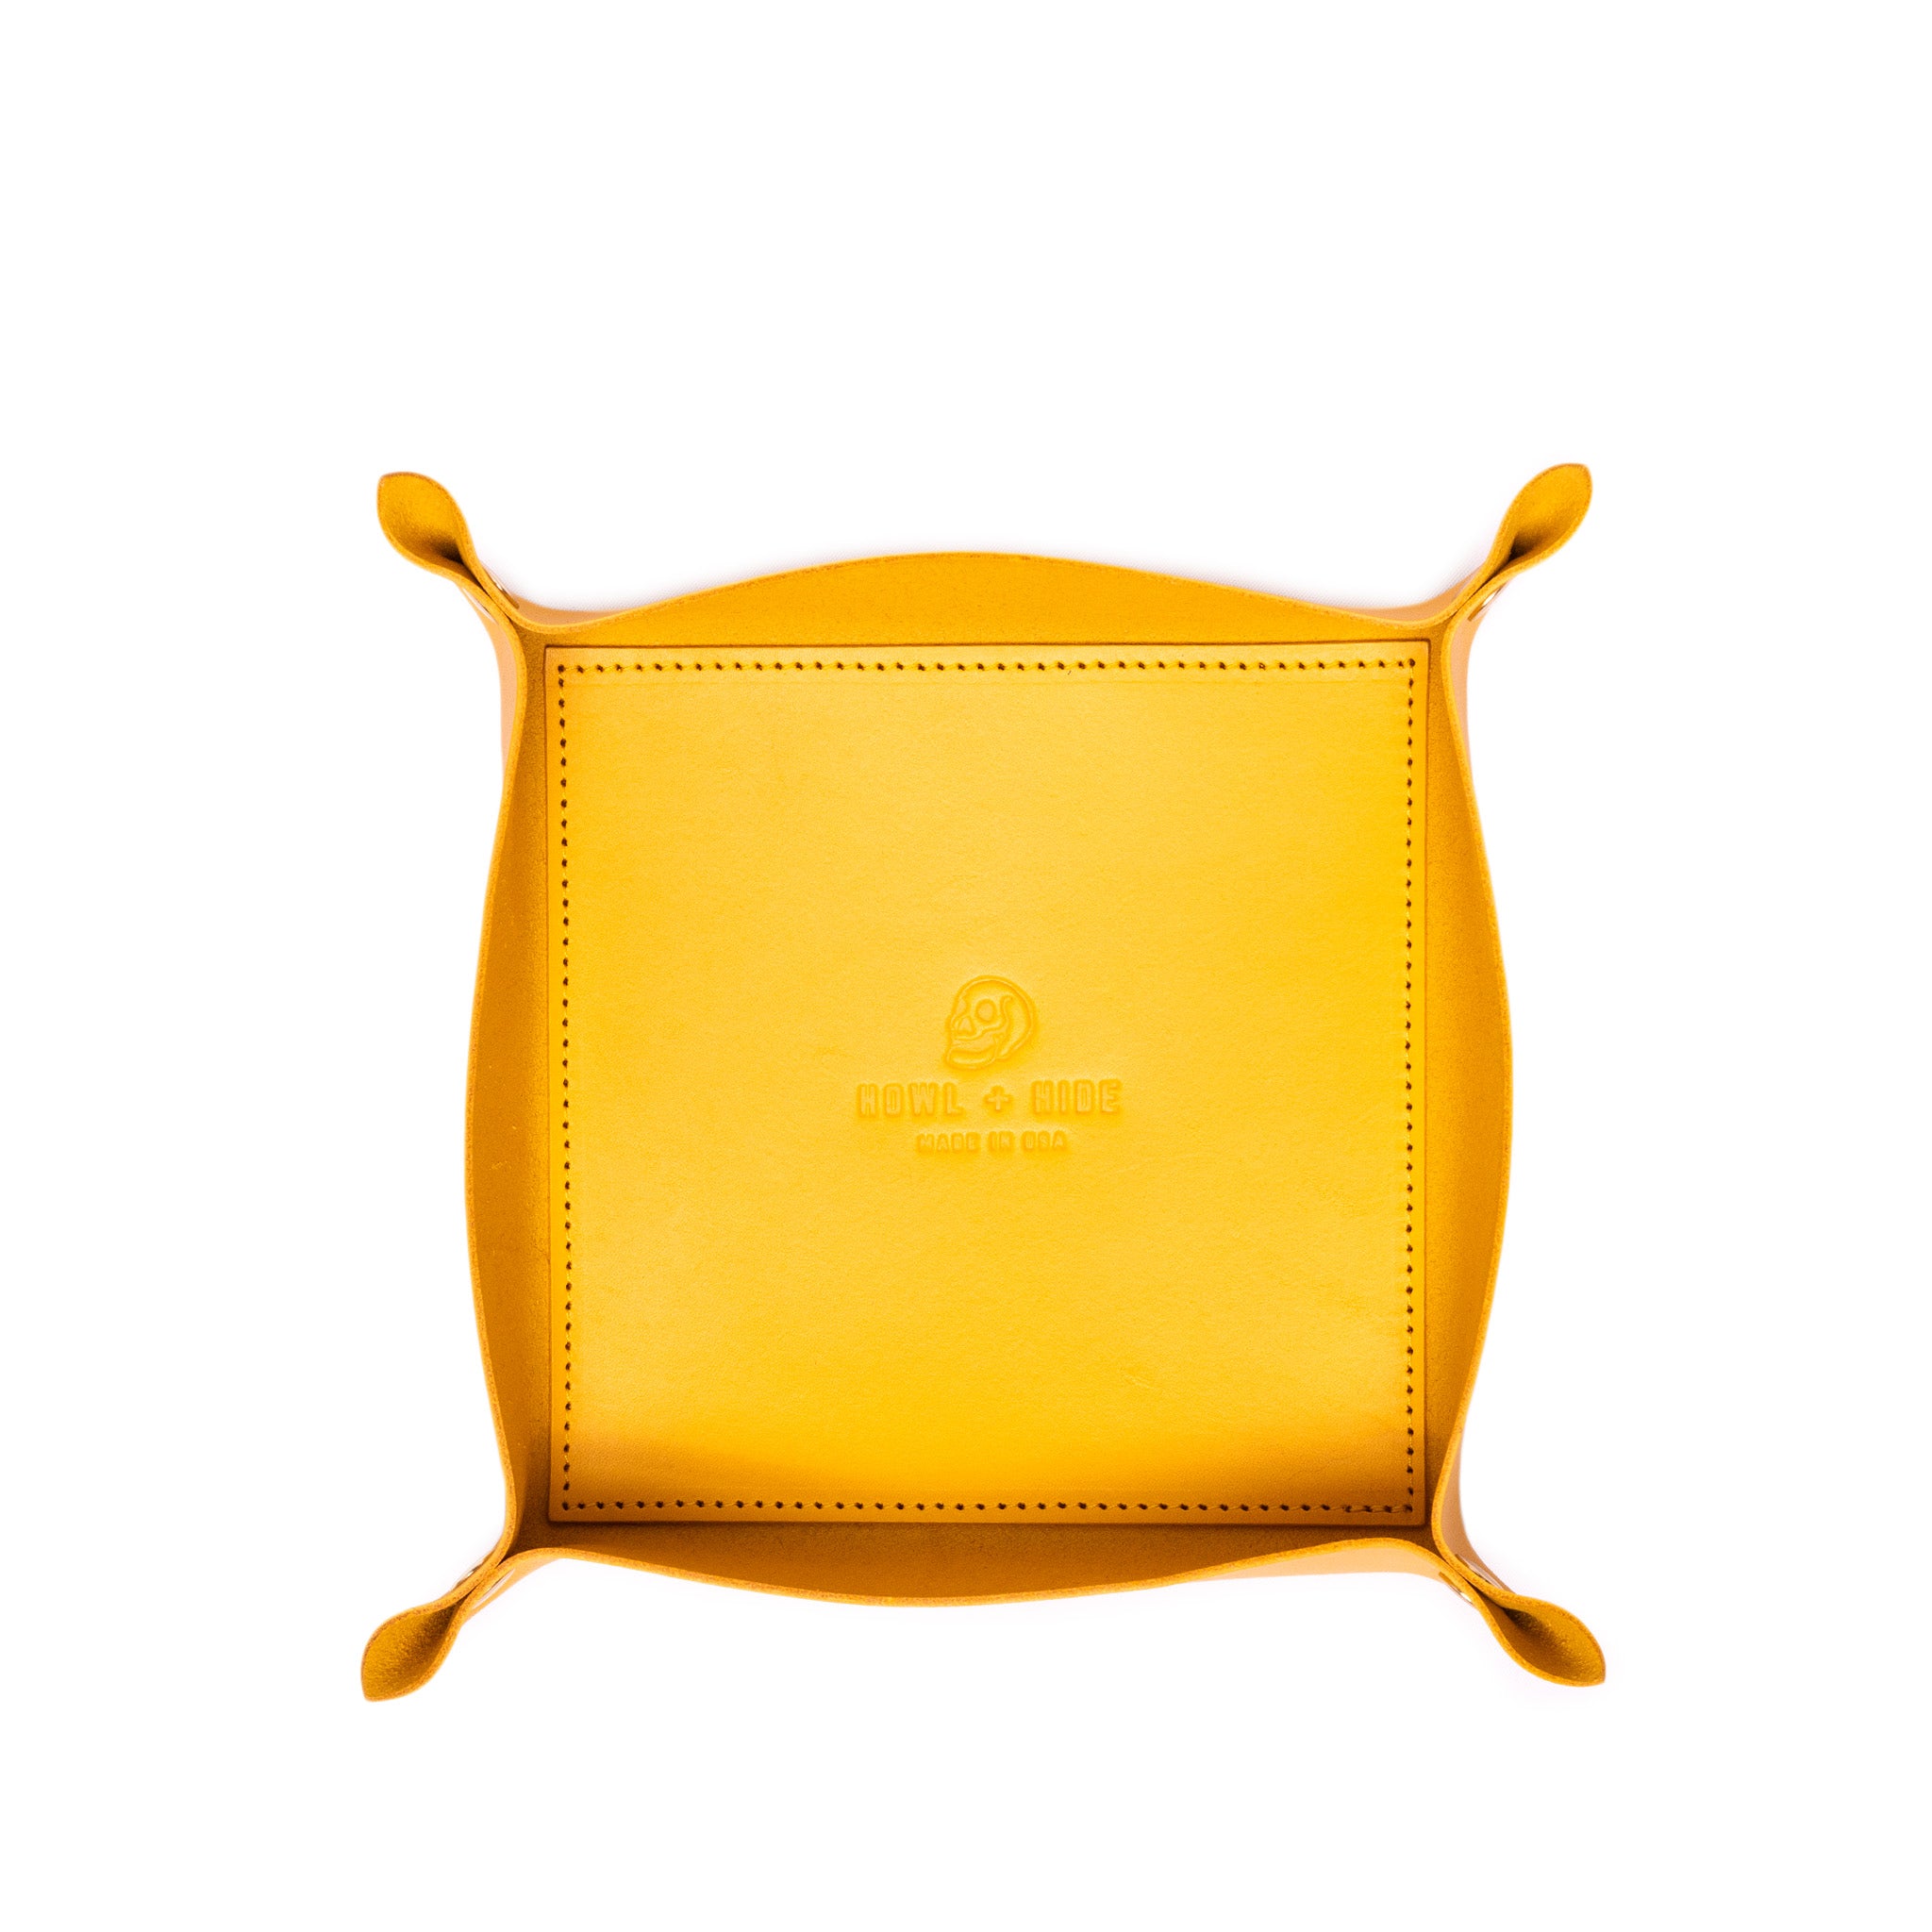 Louis Vuitton Leather Valet Tray - Yellow Decorative Accents